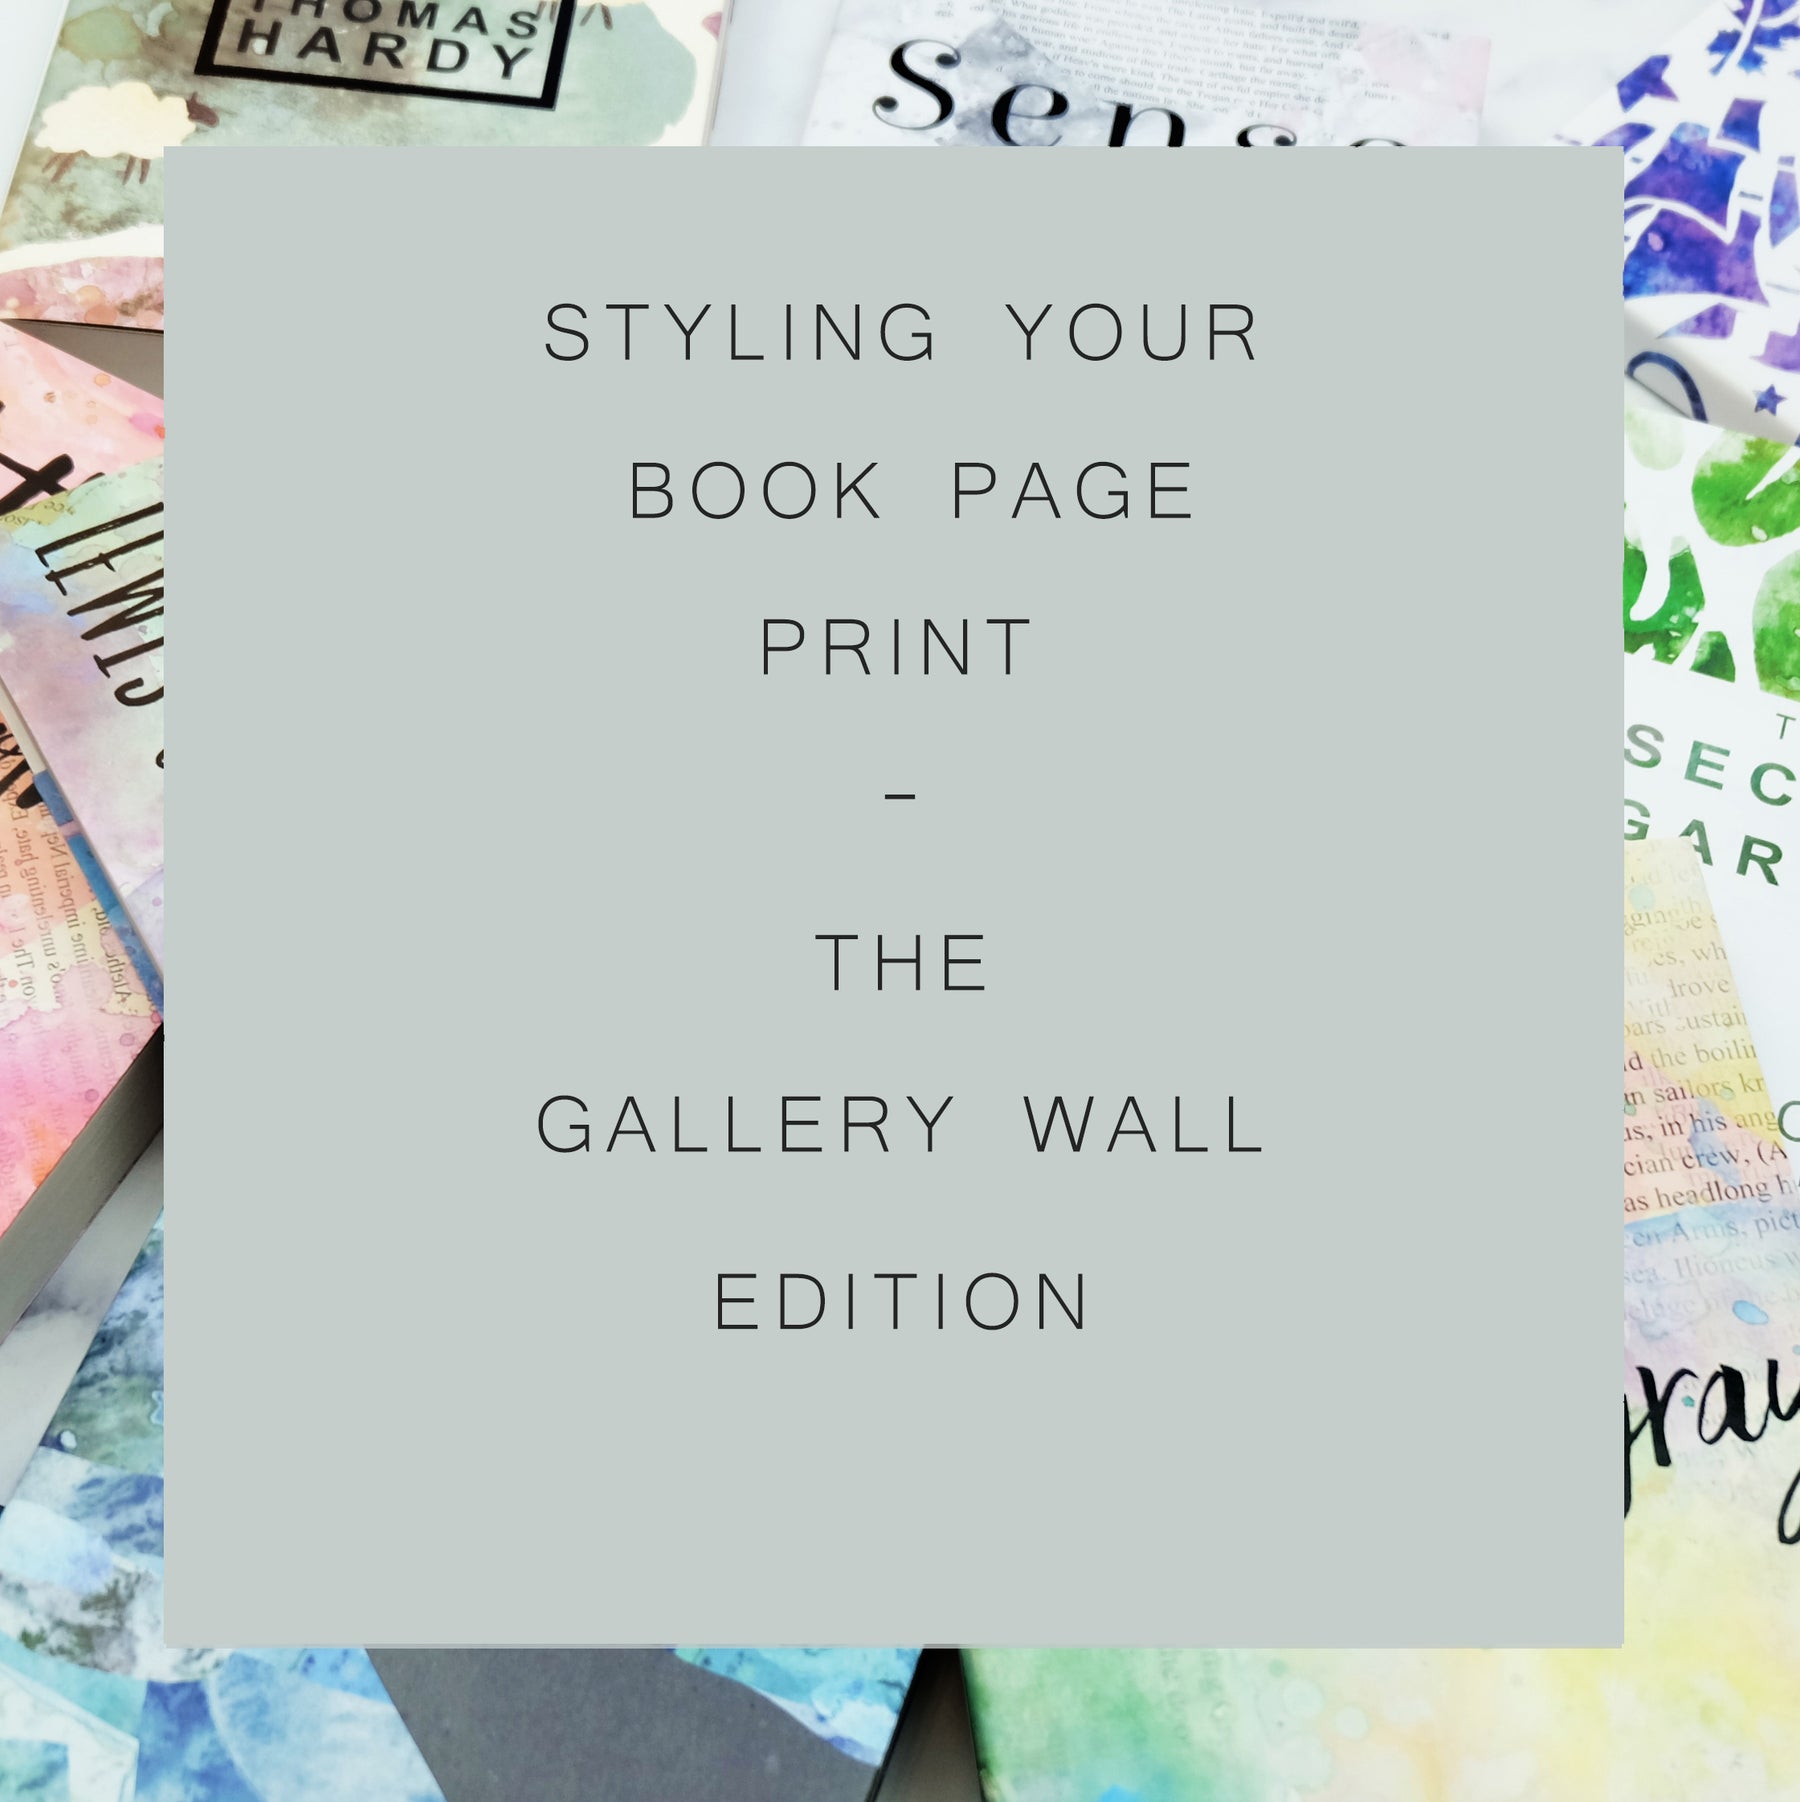 Styling Your Book Page Print - The Gallery Wall Edition